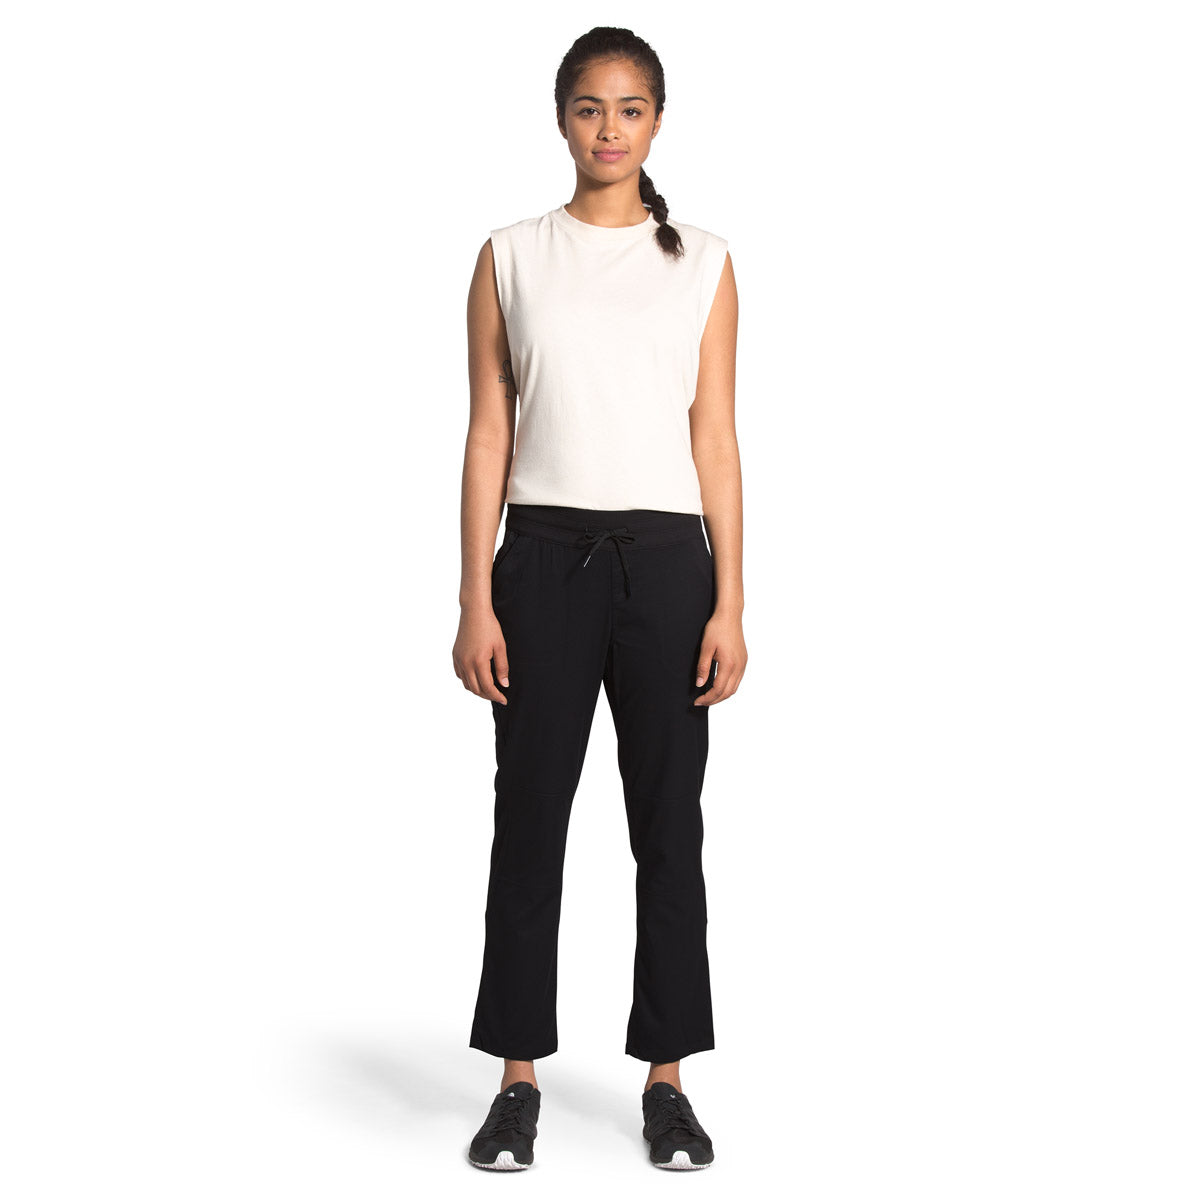 Women's Aphrodite Motion Pant - Gearhead Outfitters